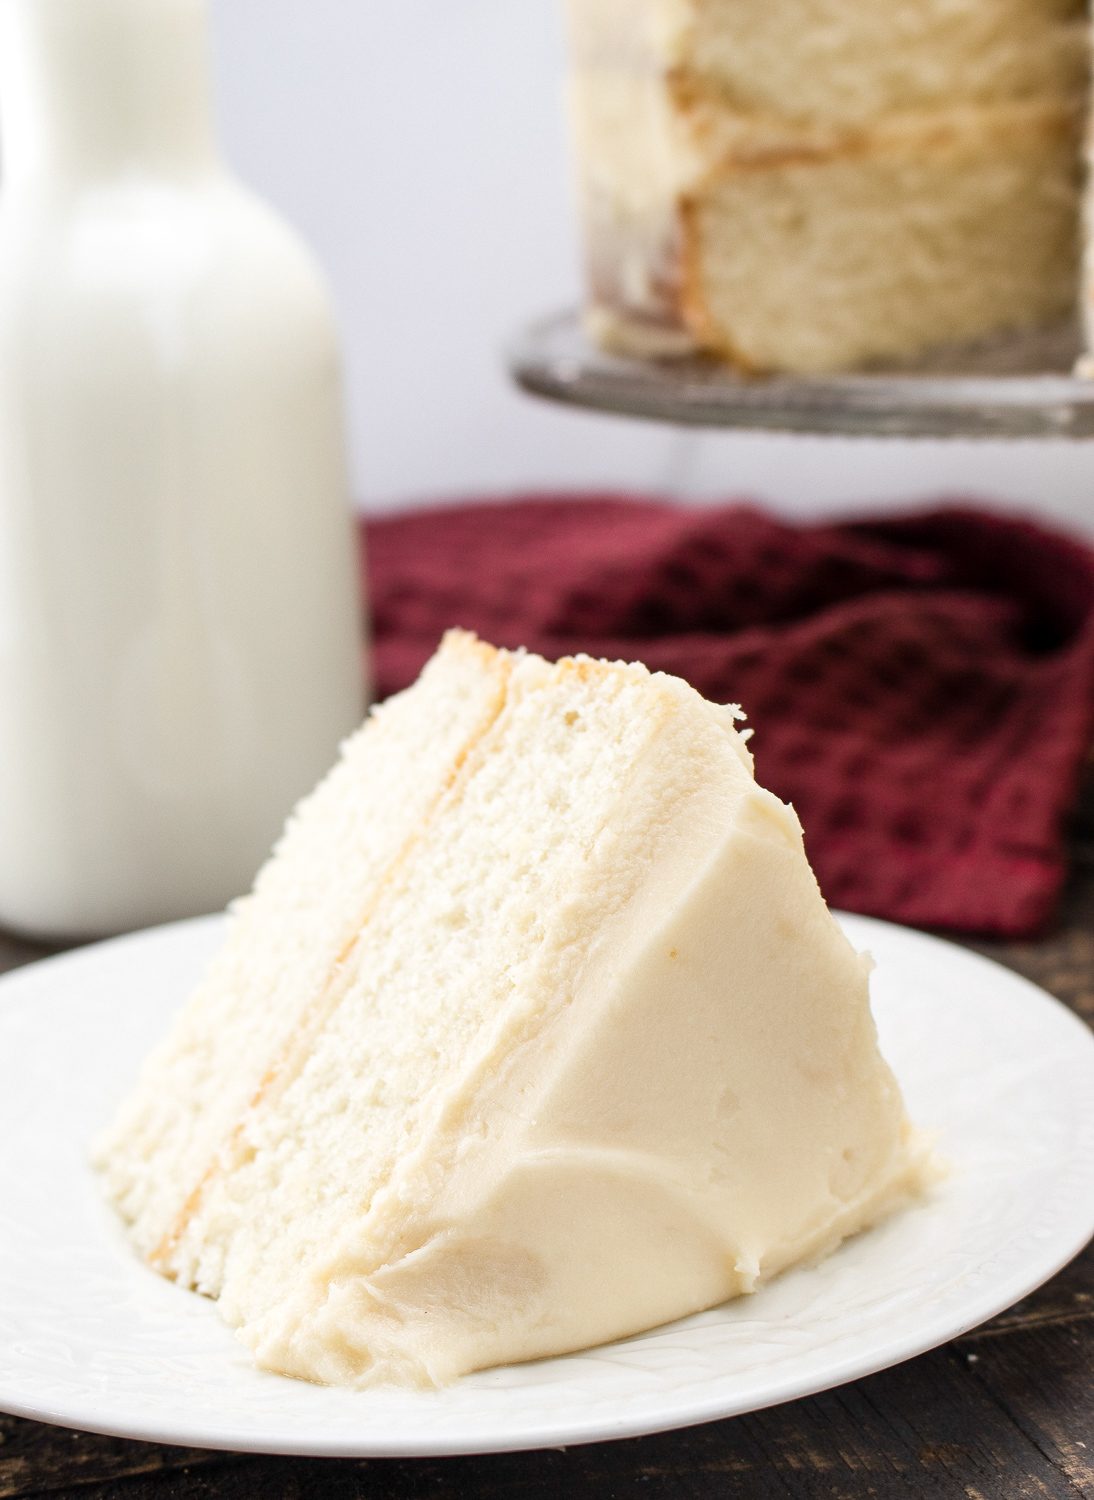 Looking for a delicious and classic white cake recipe? Look no further! This recipe is easy to follow and yields a moist and fluffy cake.